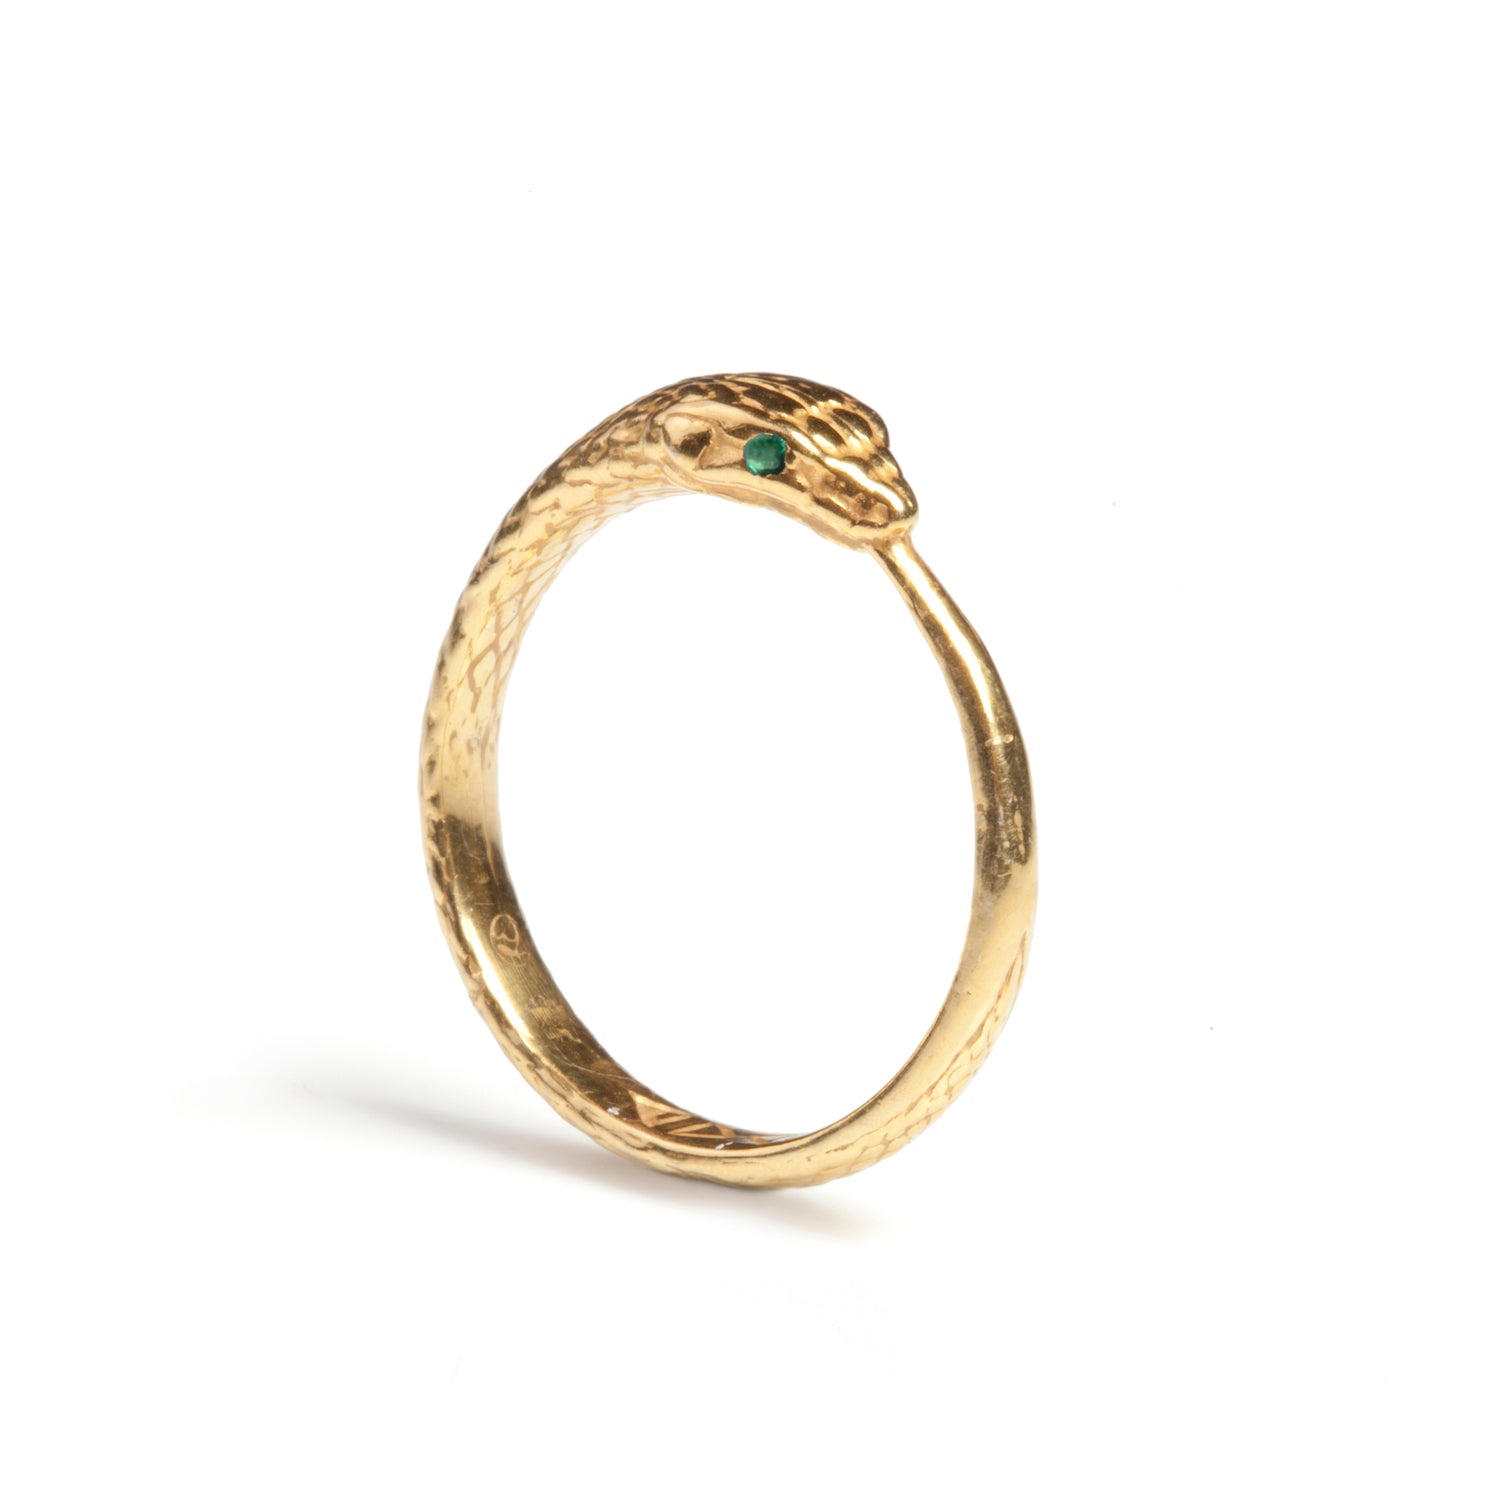 Rachel Entwistle Ouroboros Snake Ring Limited Edition With Emeralds - L / Gold Vermeil